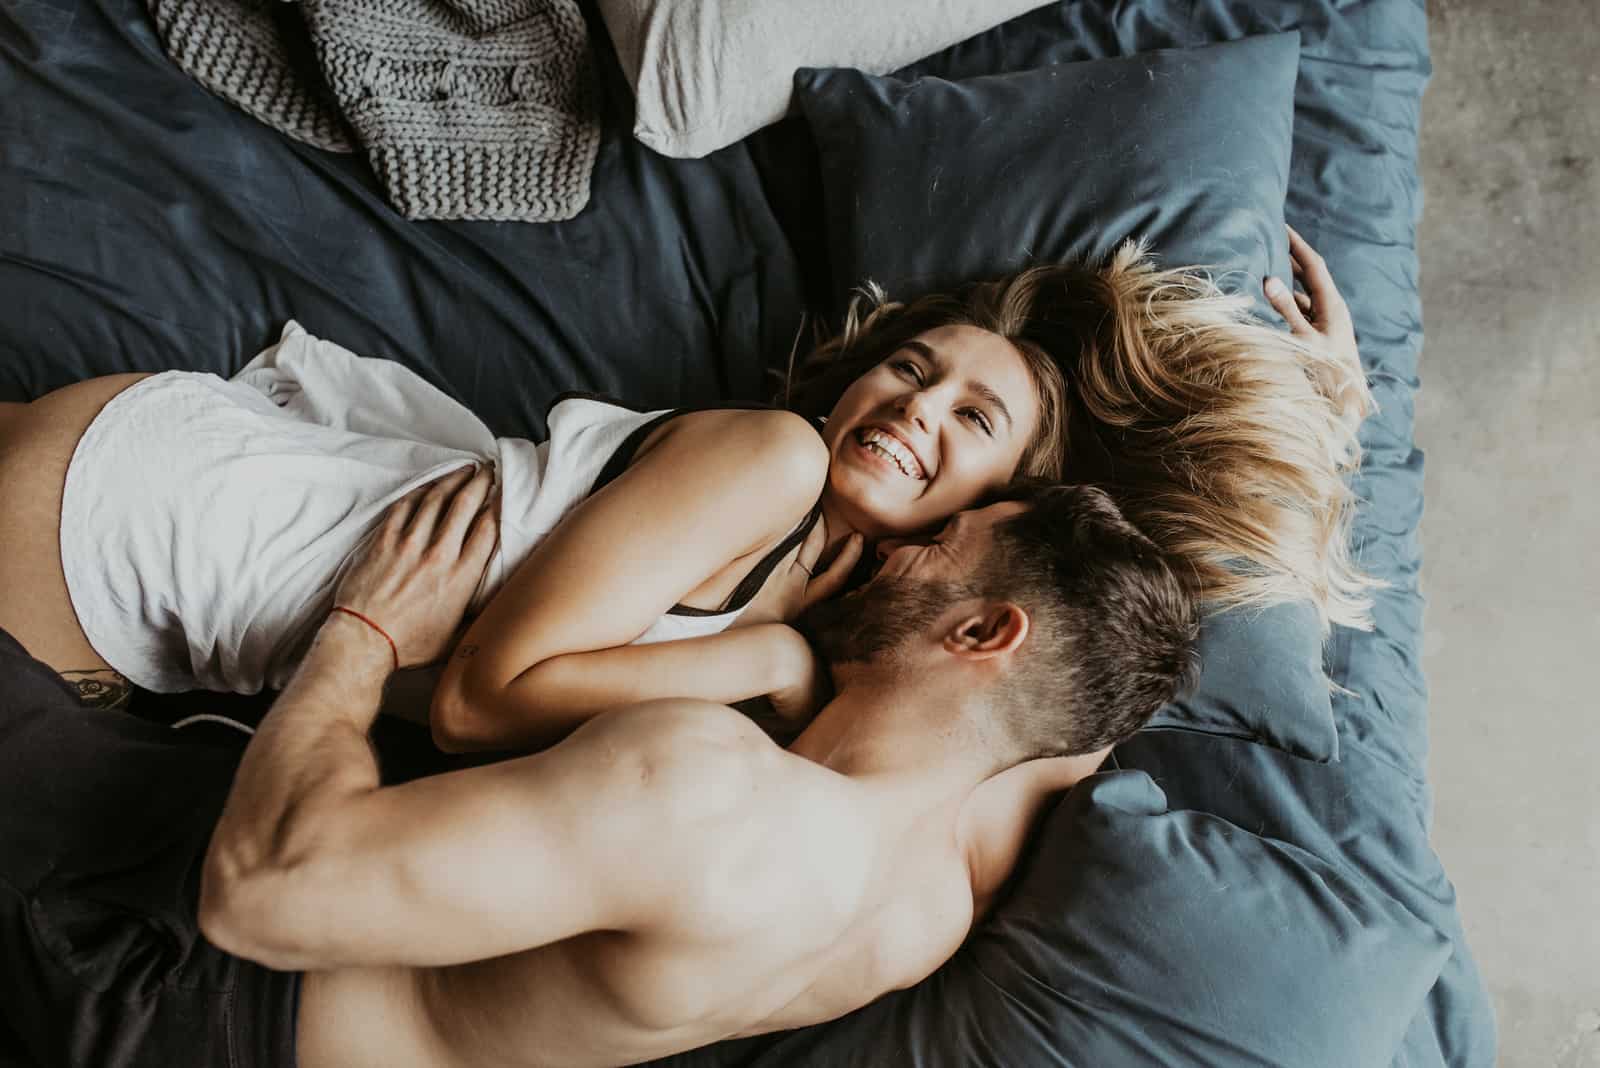 a smiling woman lies in bed with a man